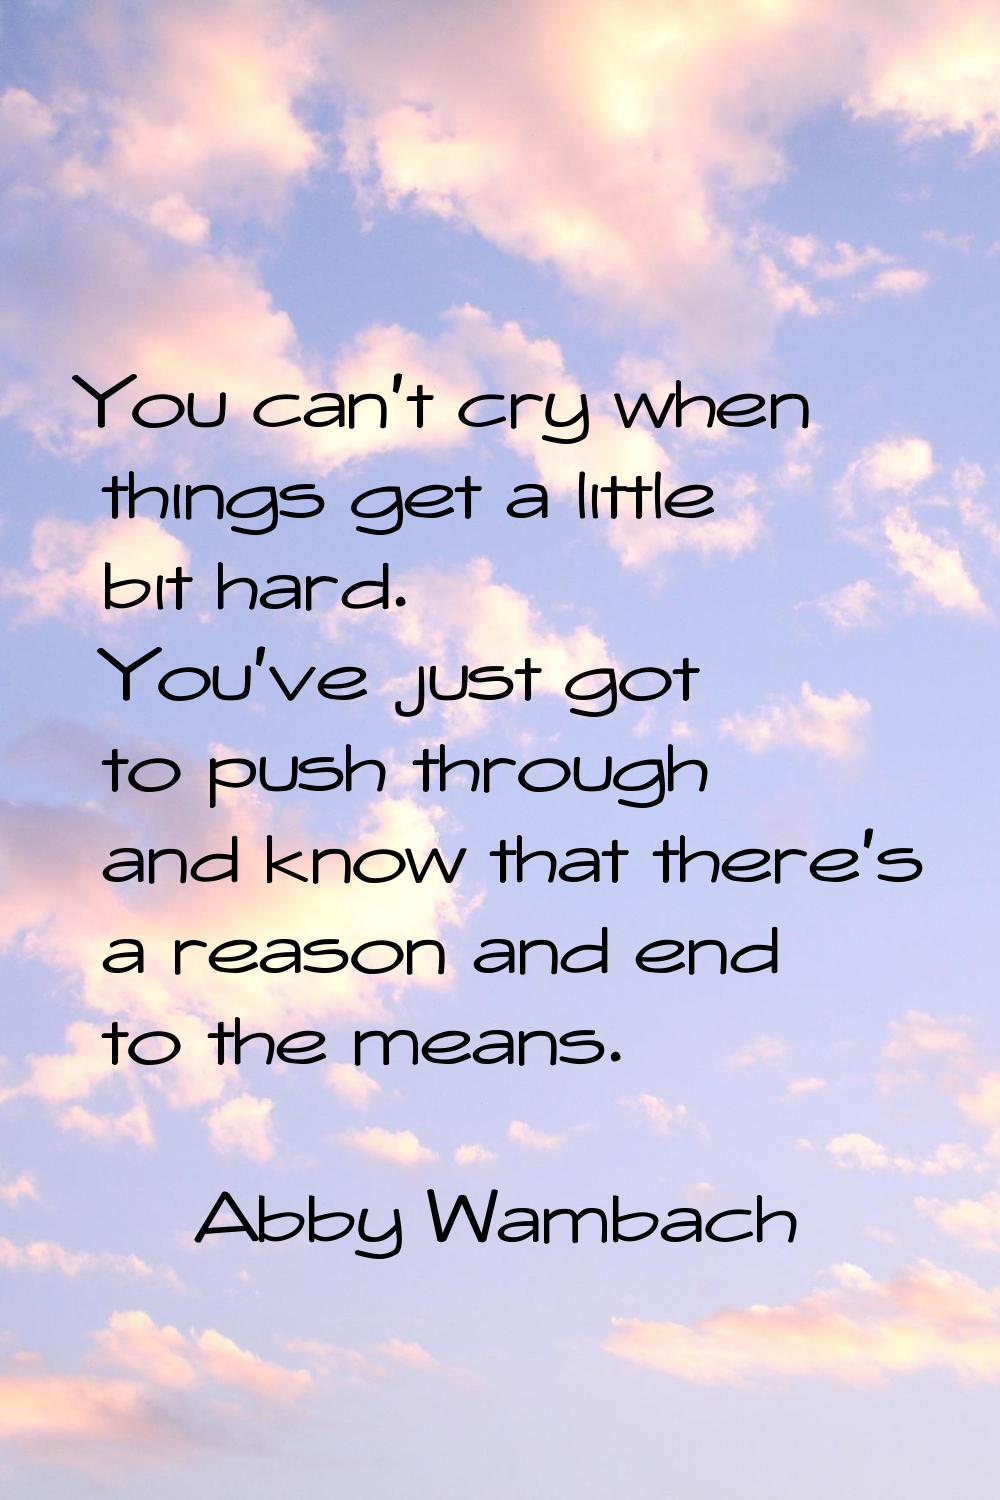 You can't cry when things get a little bit hard. You've just got to push through and know that ther